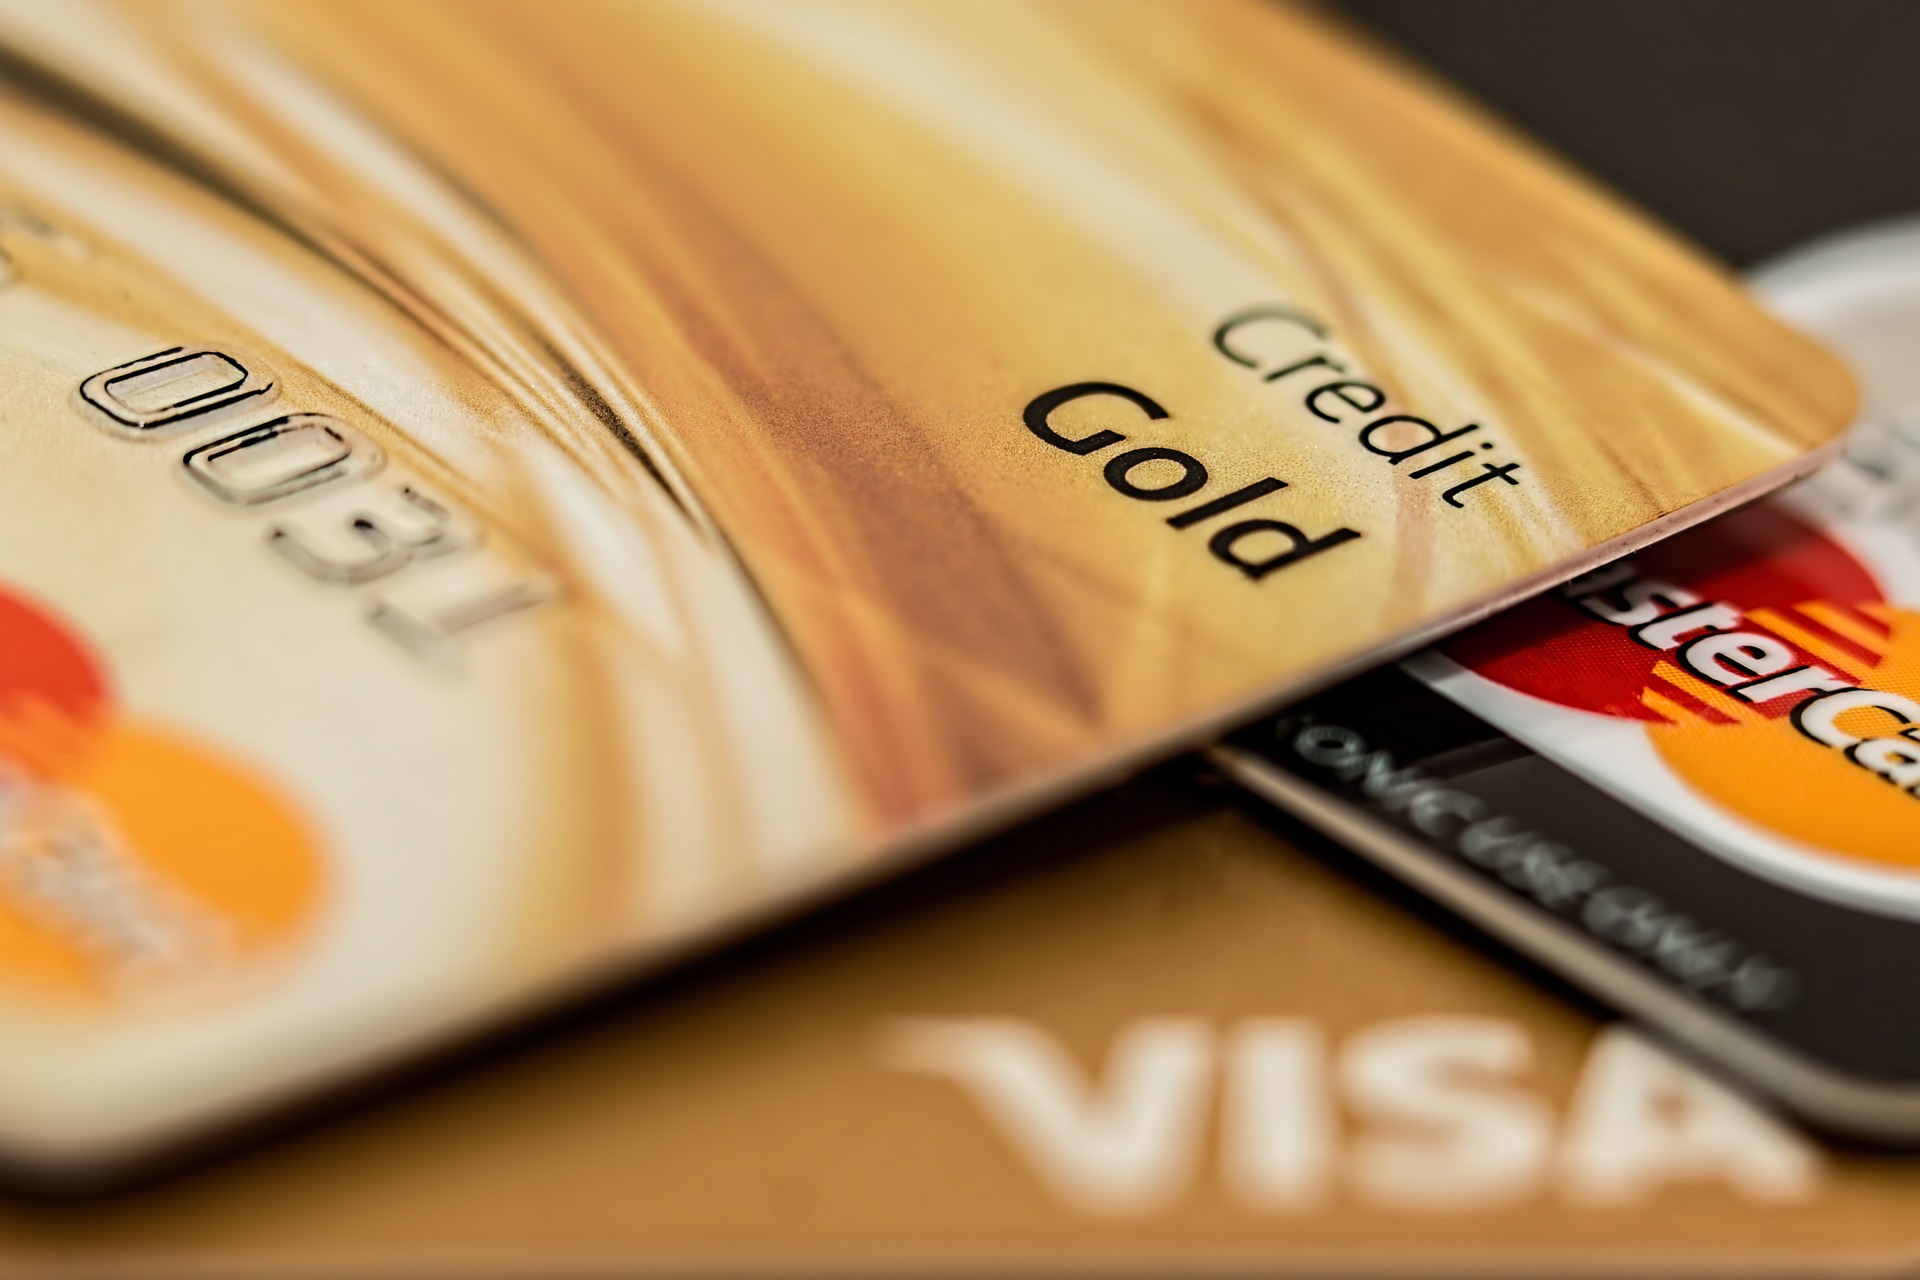 An image of a credit card.